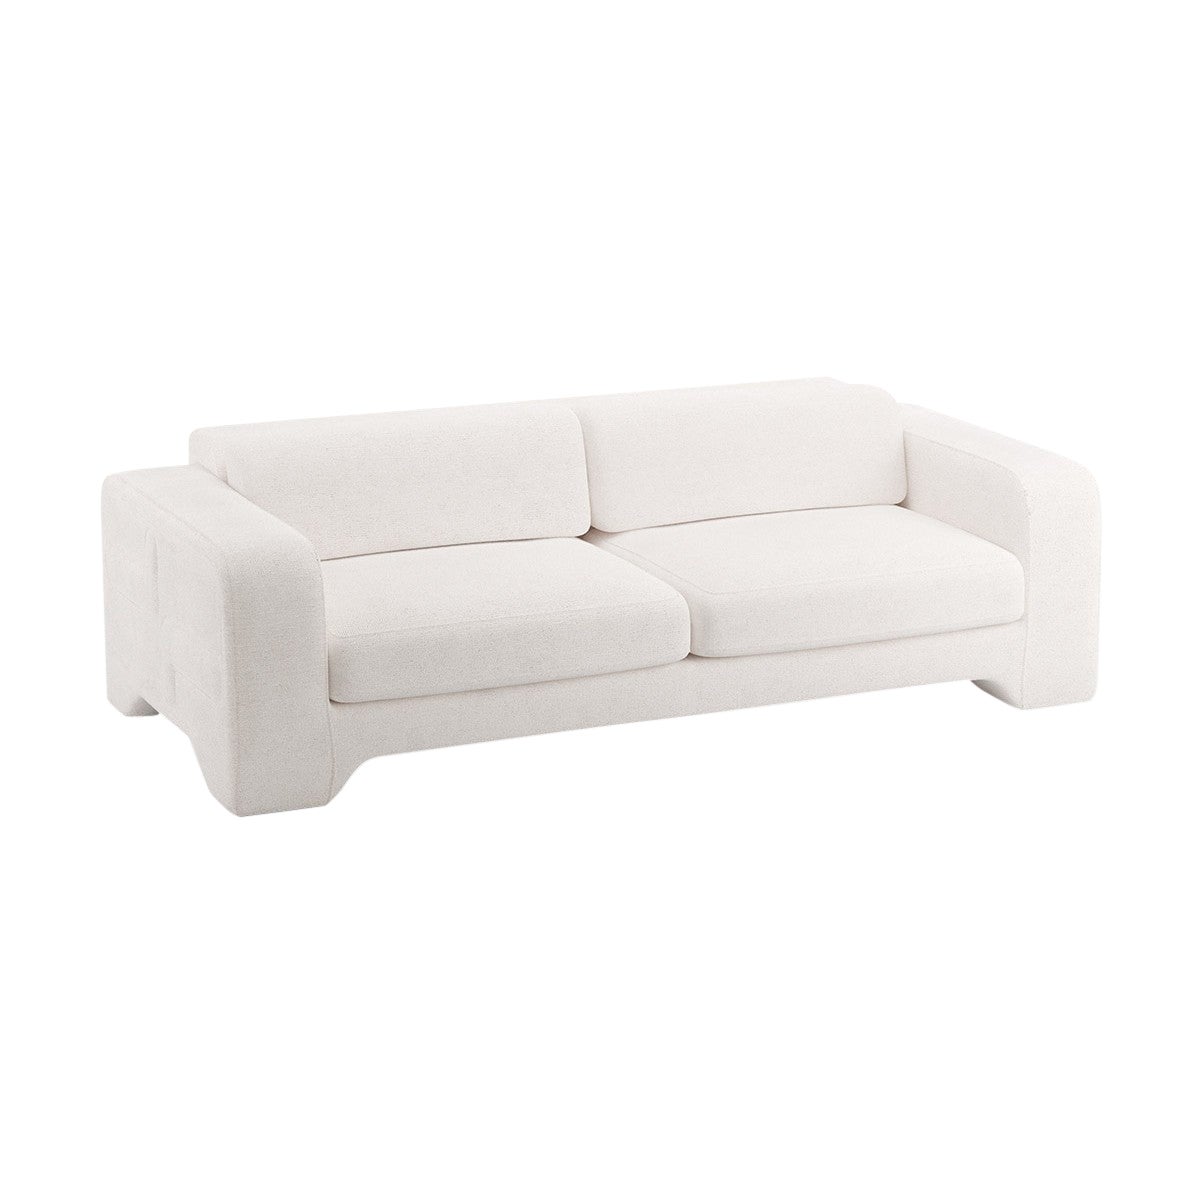 Popus Editions Giovanna 2.5 Seater Sofa in Ivory Megeve Fabric with Knit Effect For Sale